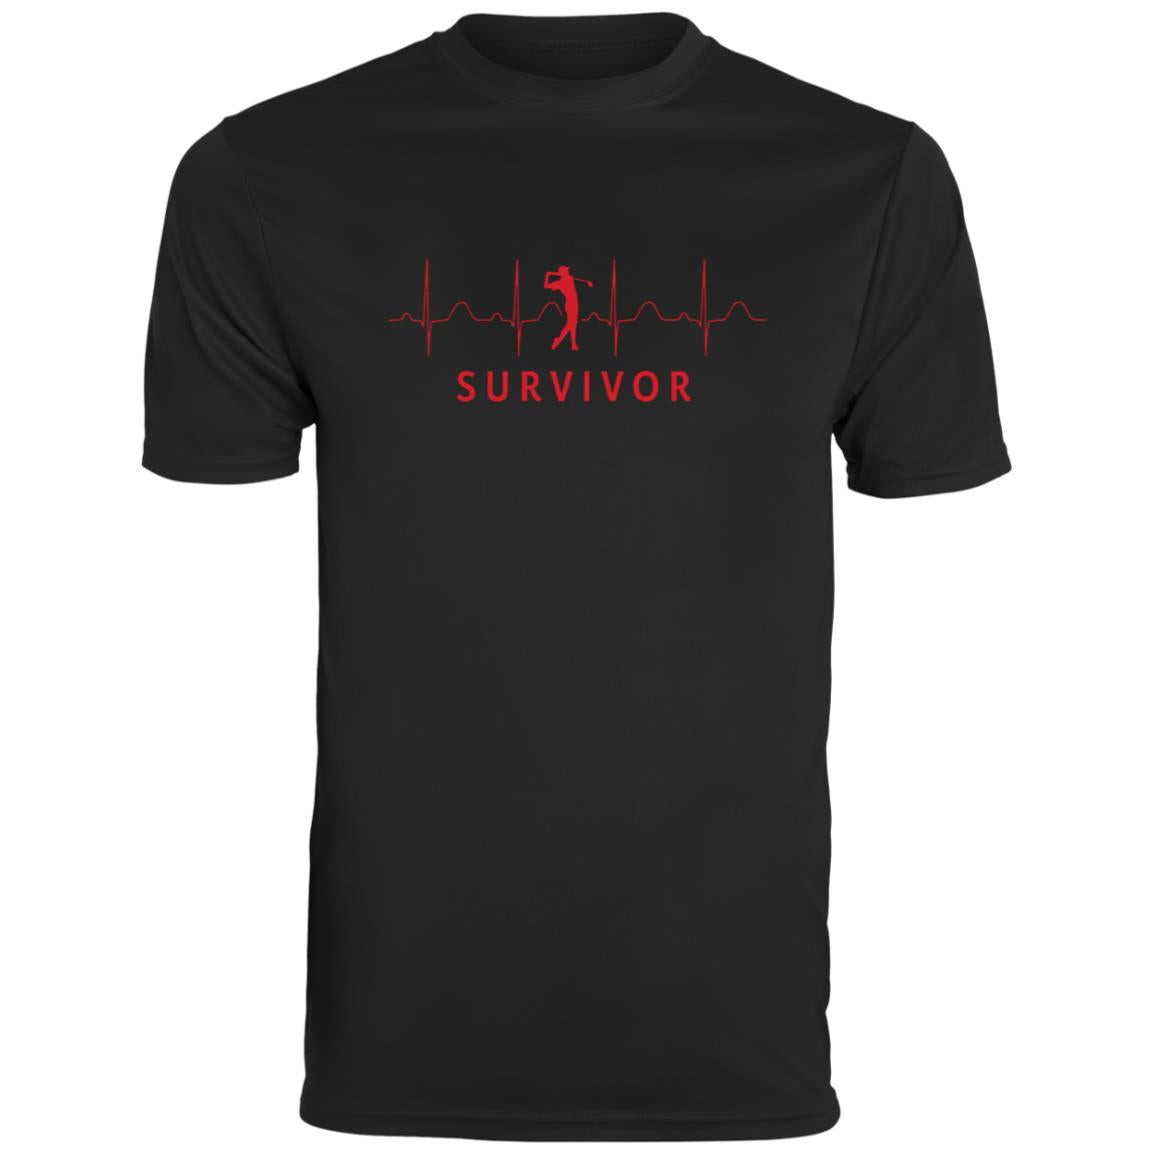 Black tee with "SURVIVOR" text along with a golfer icon with EKG lines behind.